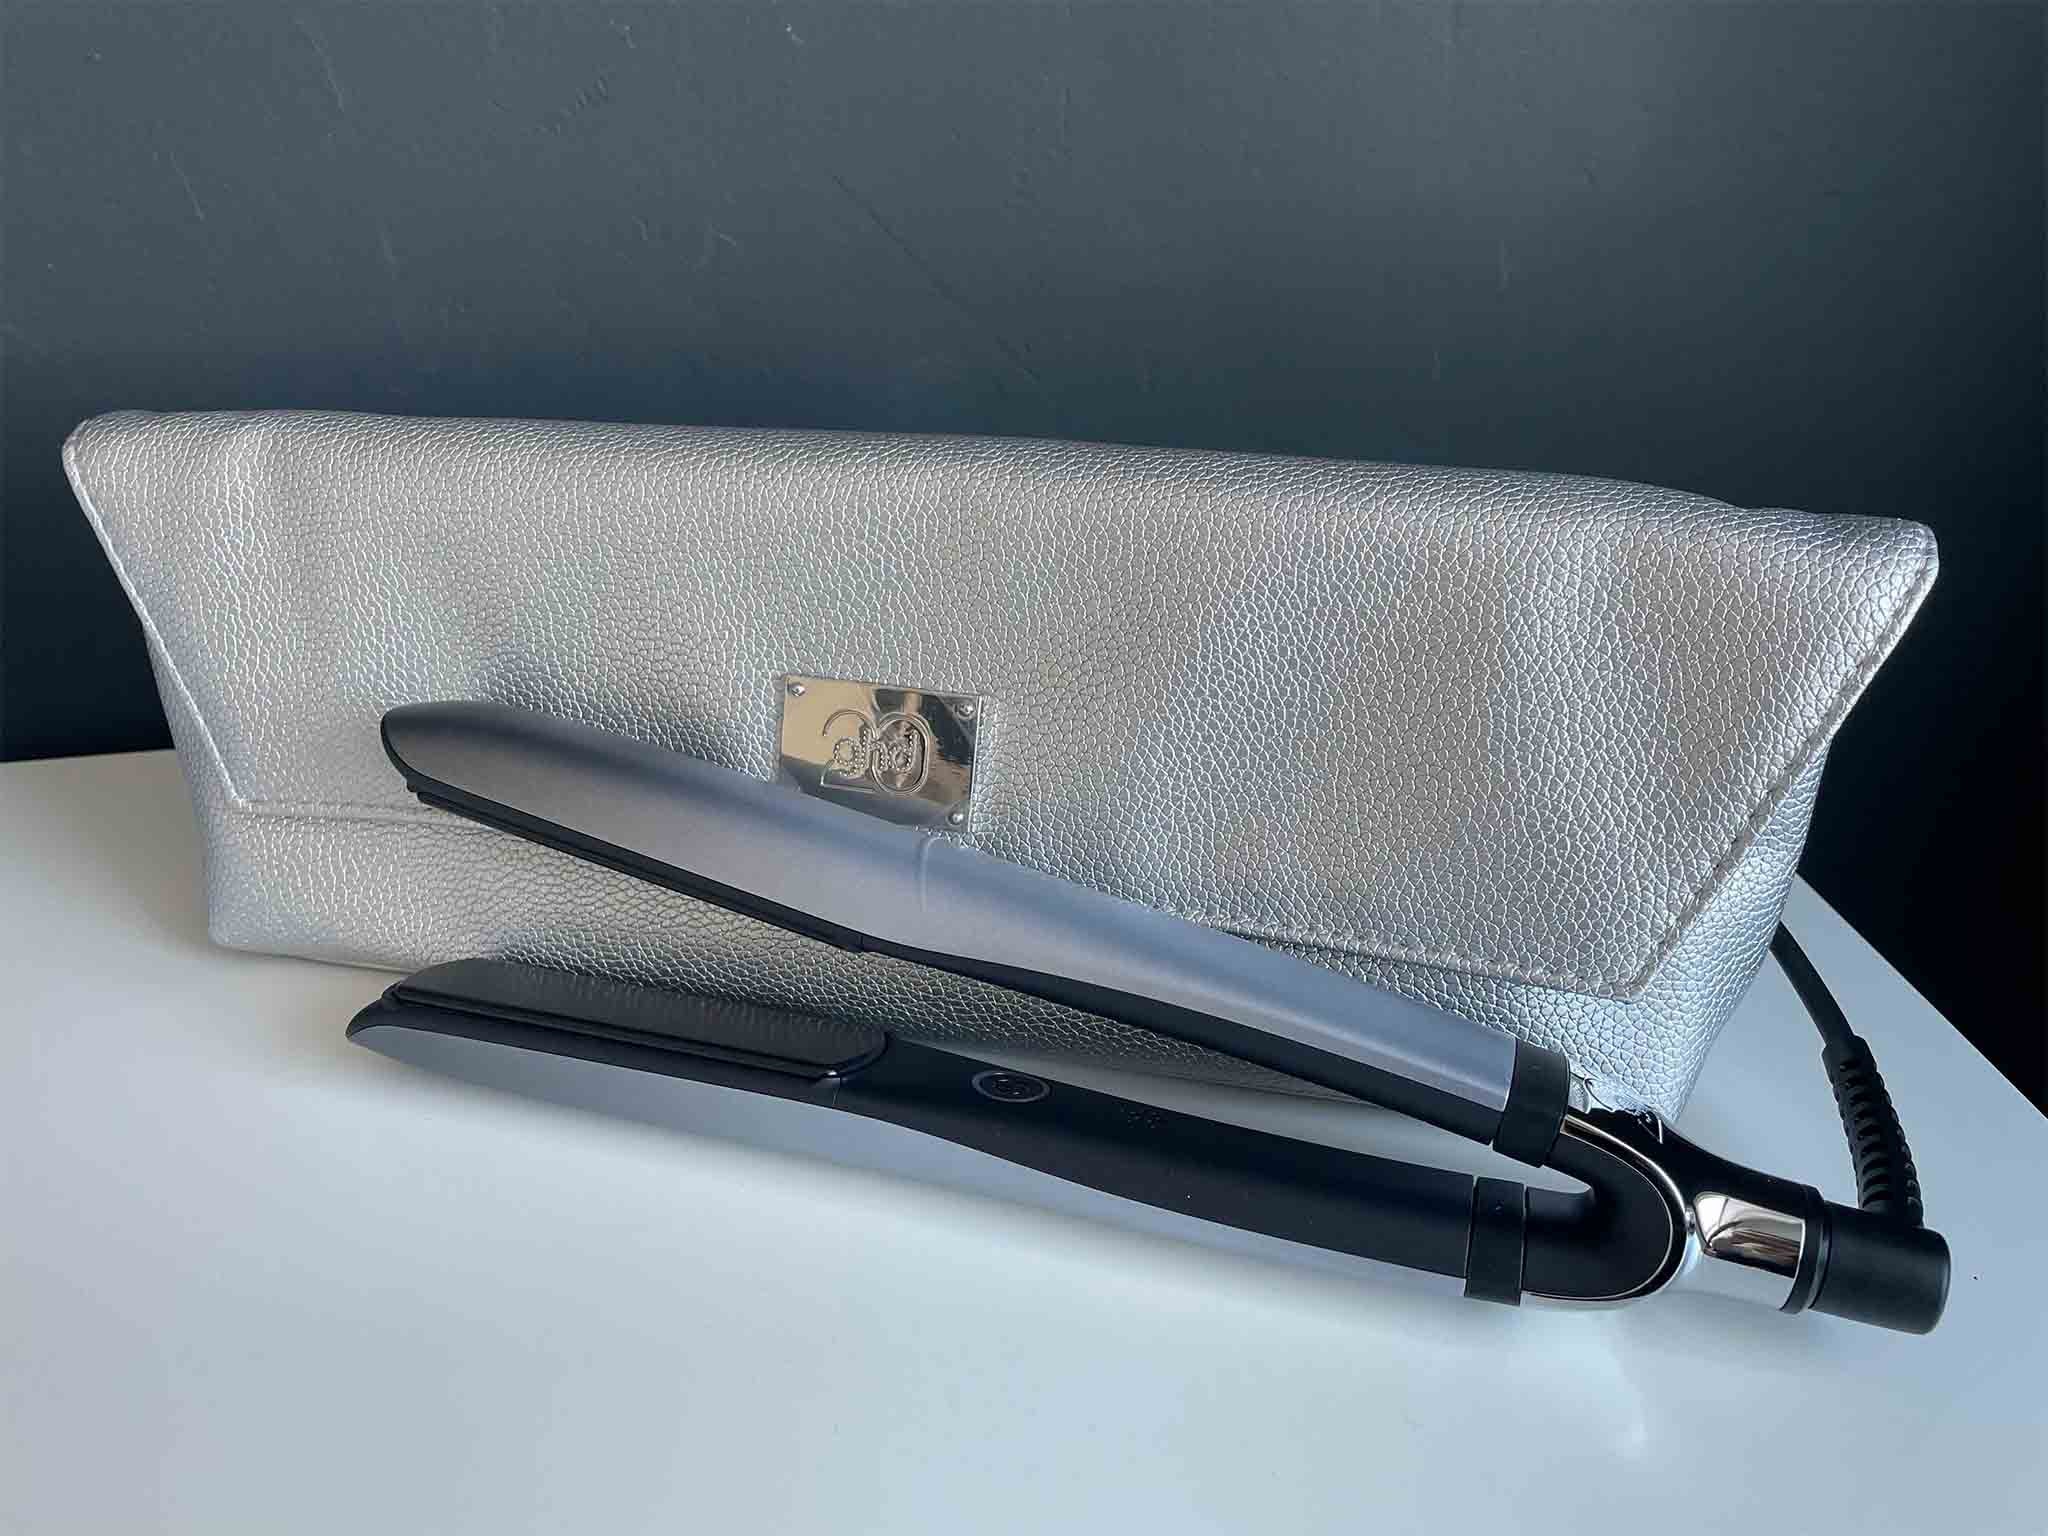 Ghd platinum plus review: We put the smart straightener to the